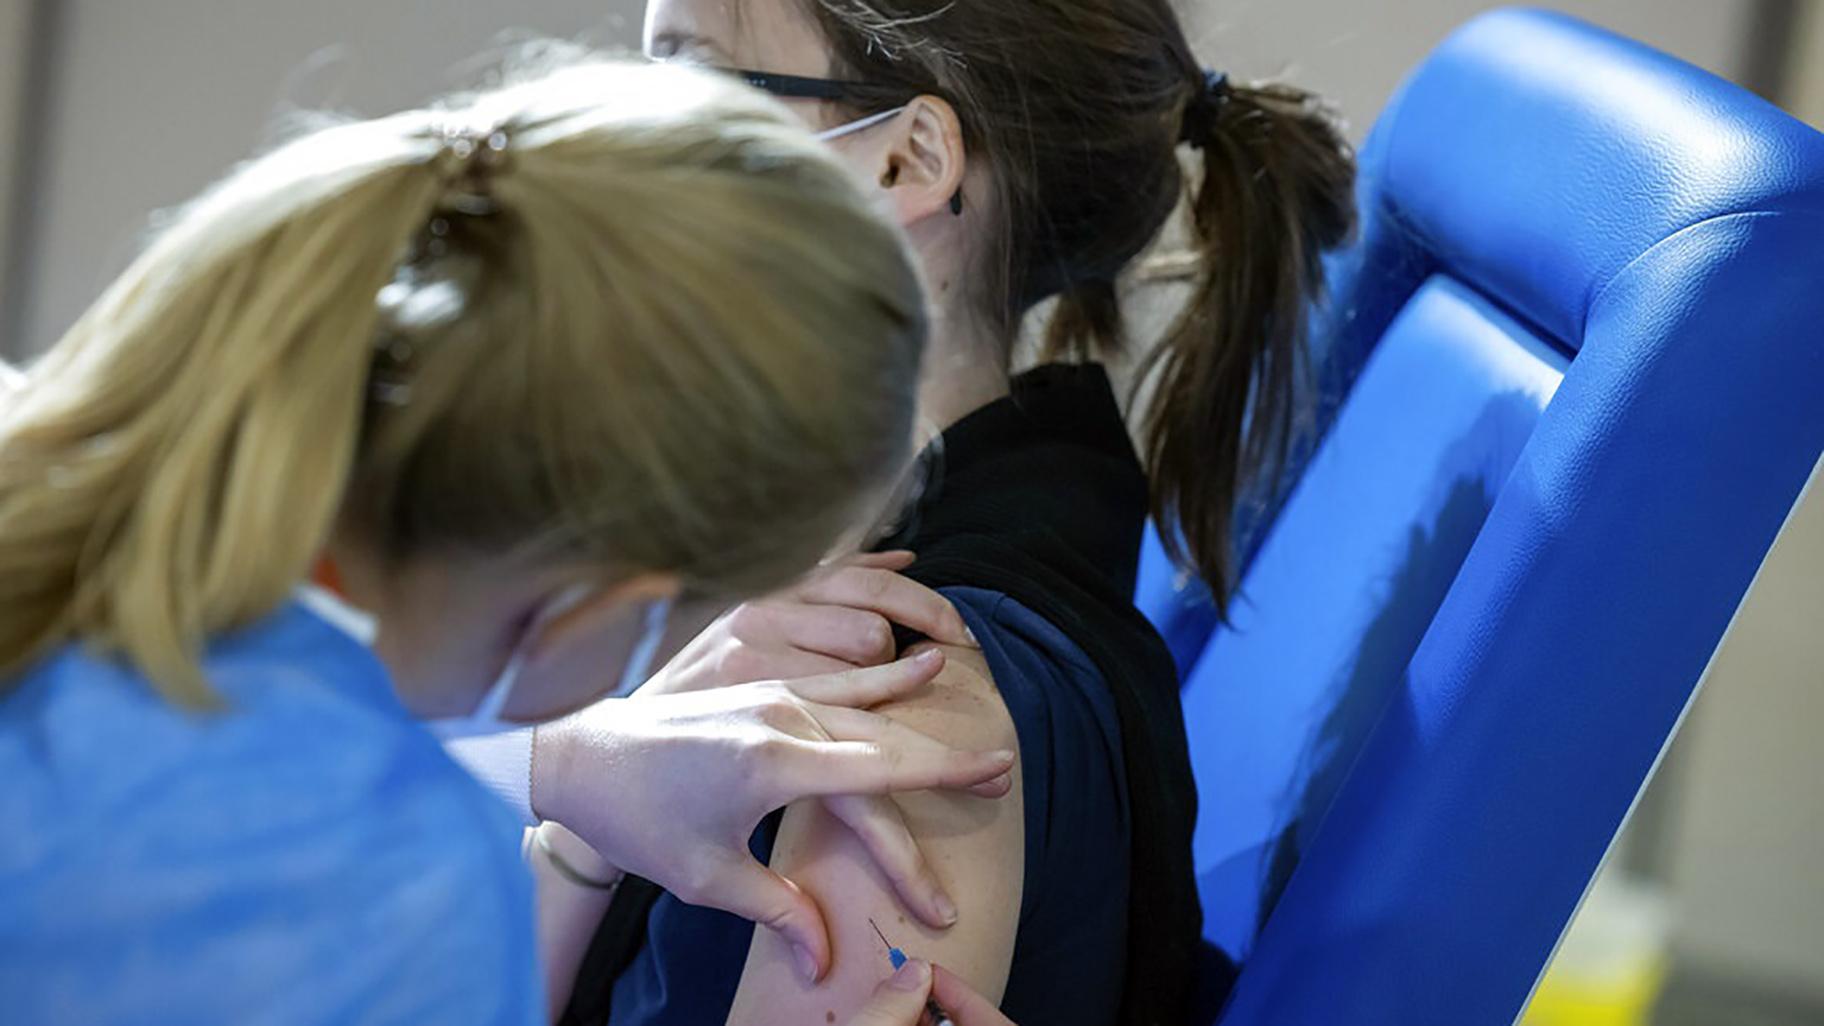 A healthcare worker administers a dose of the AstraZeneca COVID-19 vaccine to a woman at the Brussels Expo center in Brussels, Thursday, March 4, 2021. The Expo is one of the largest vaccination centers in Belgium. (AP Photo / Olivier Matthys)